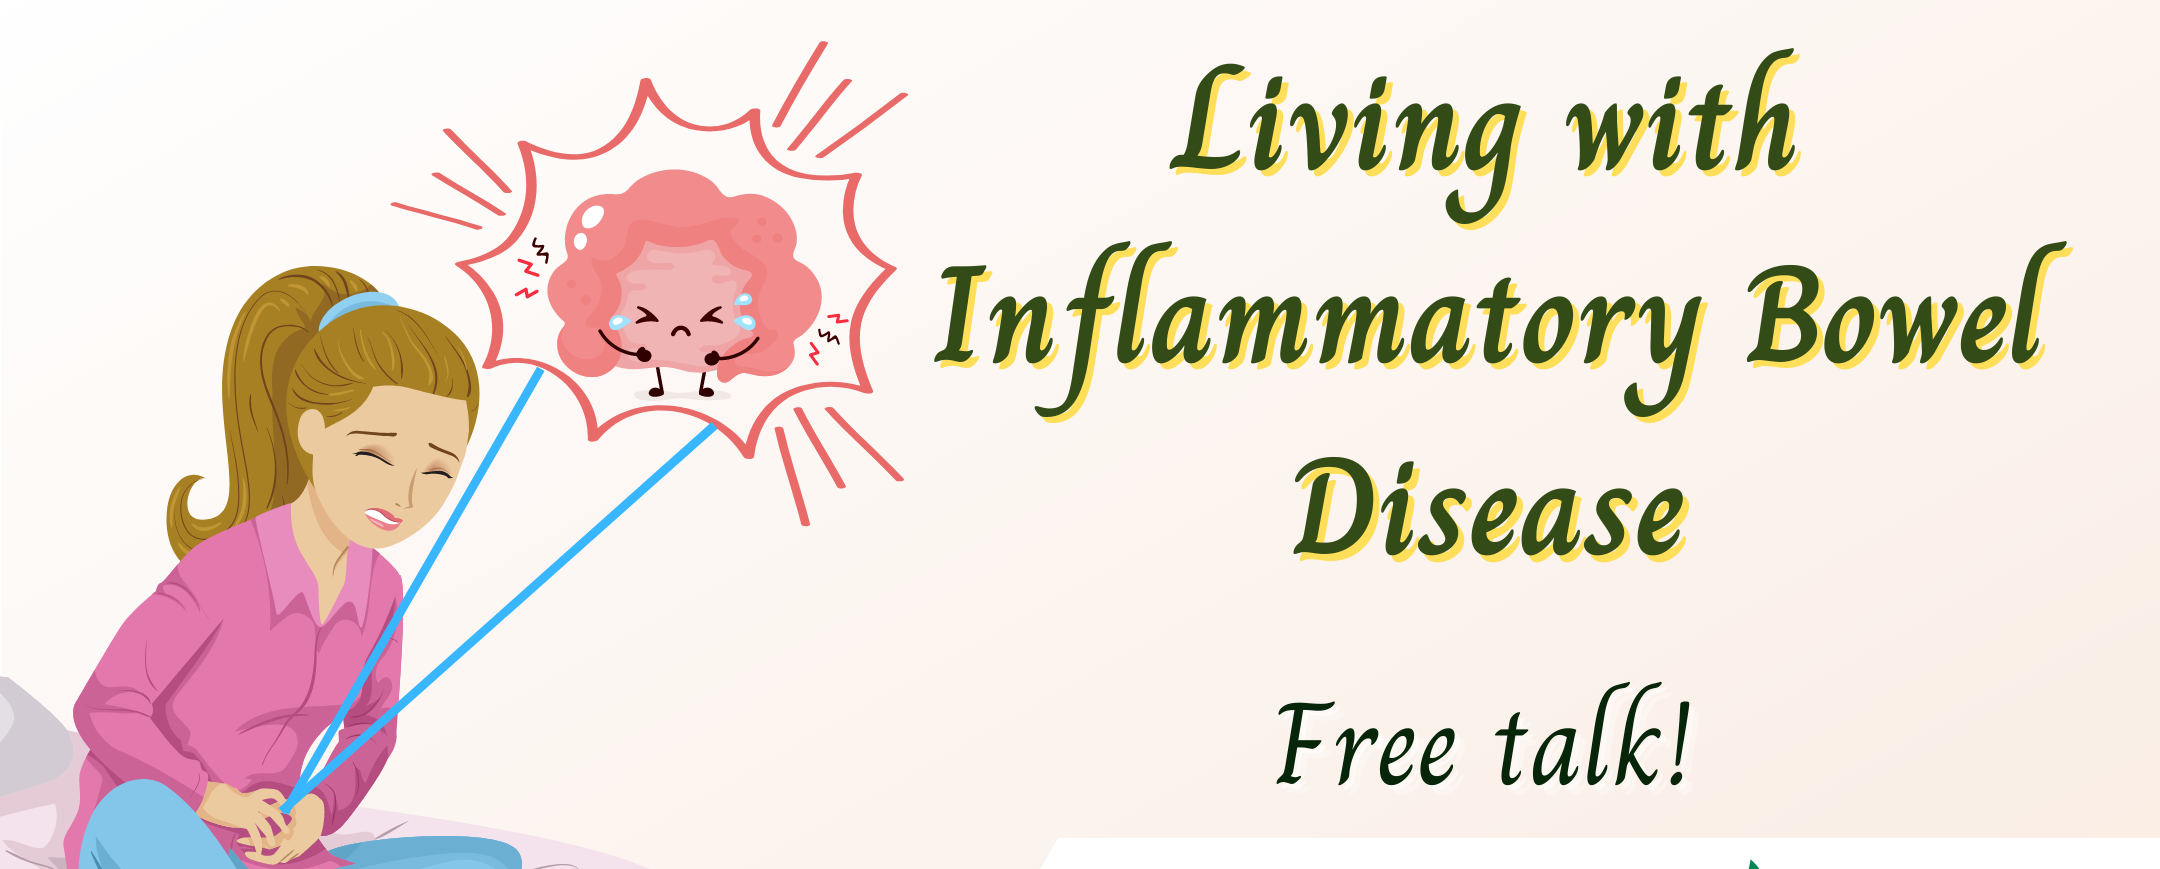 Living with Inflammatory Bowel Disease